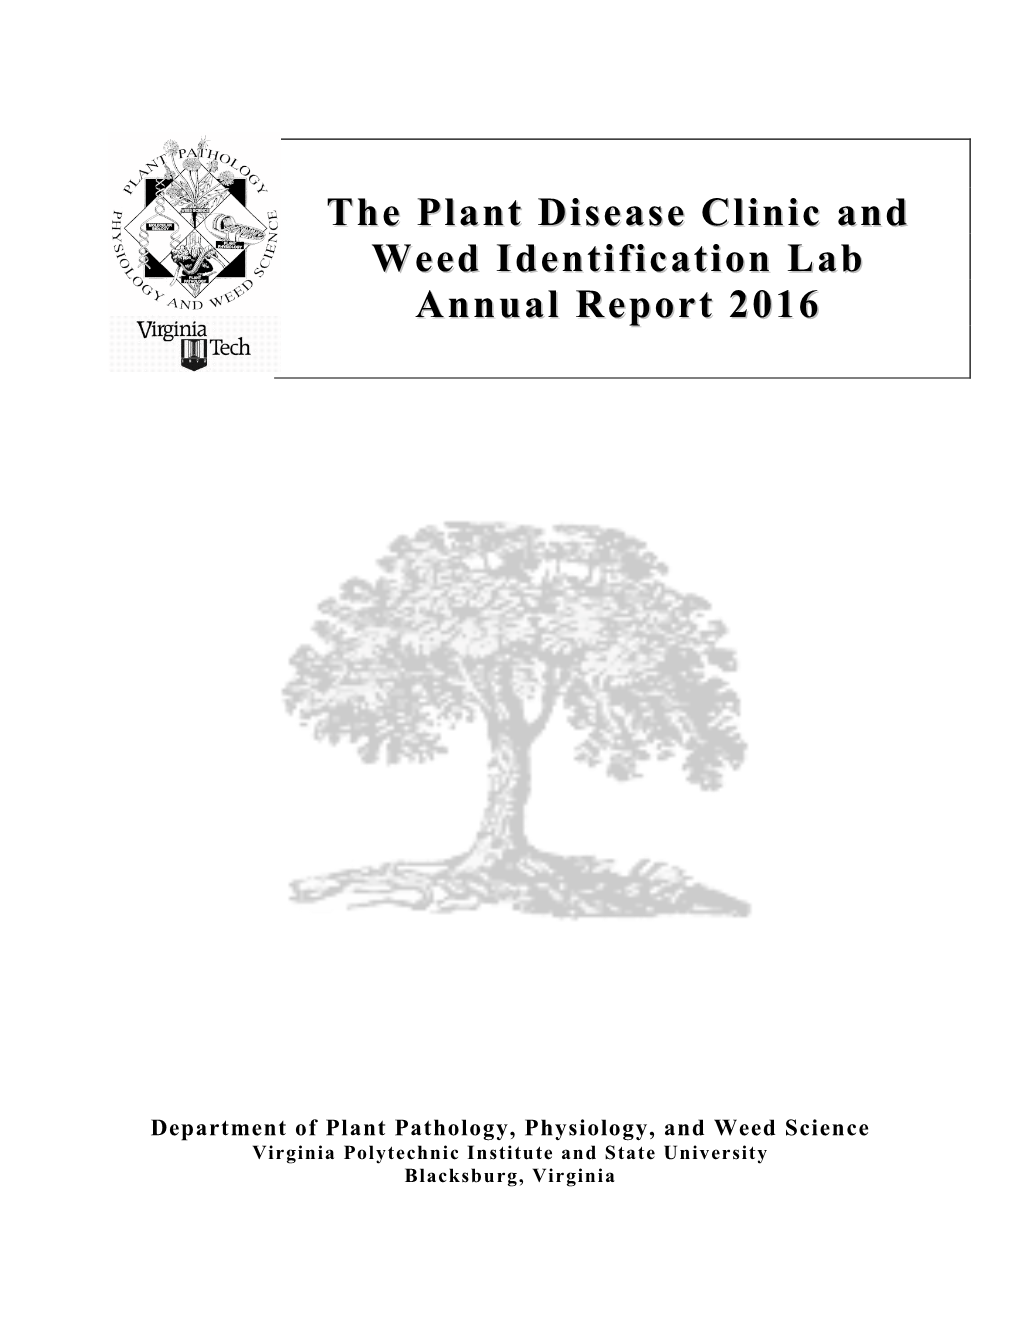 The Plant Disease Clinic and Weed Identification Lab Annual Report 2016